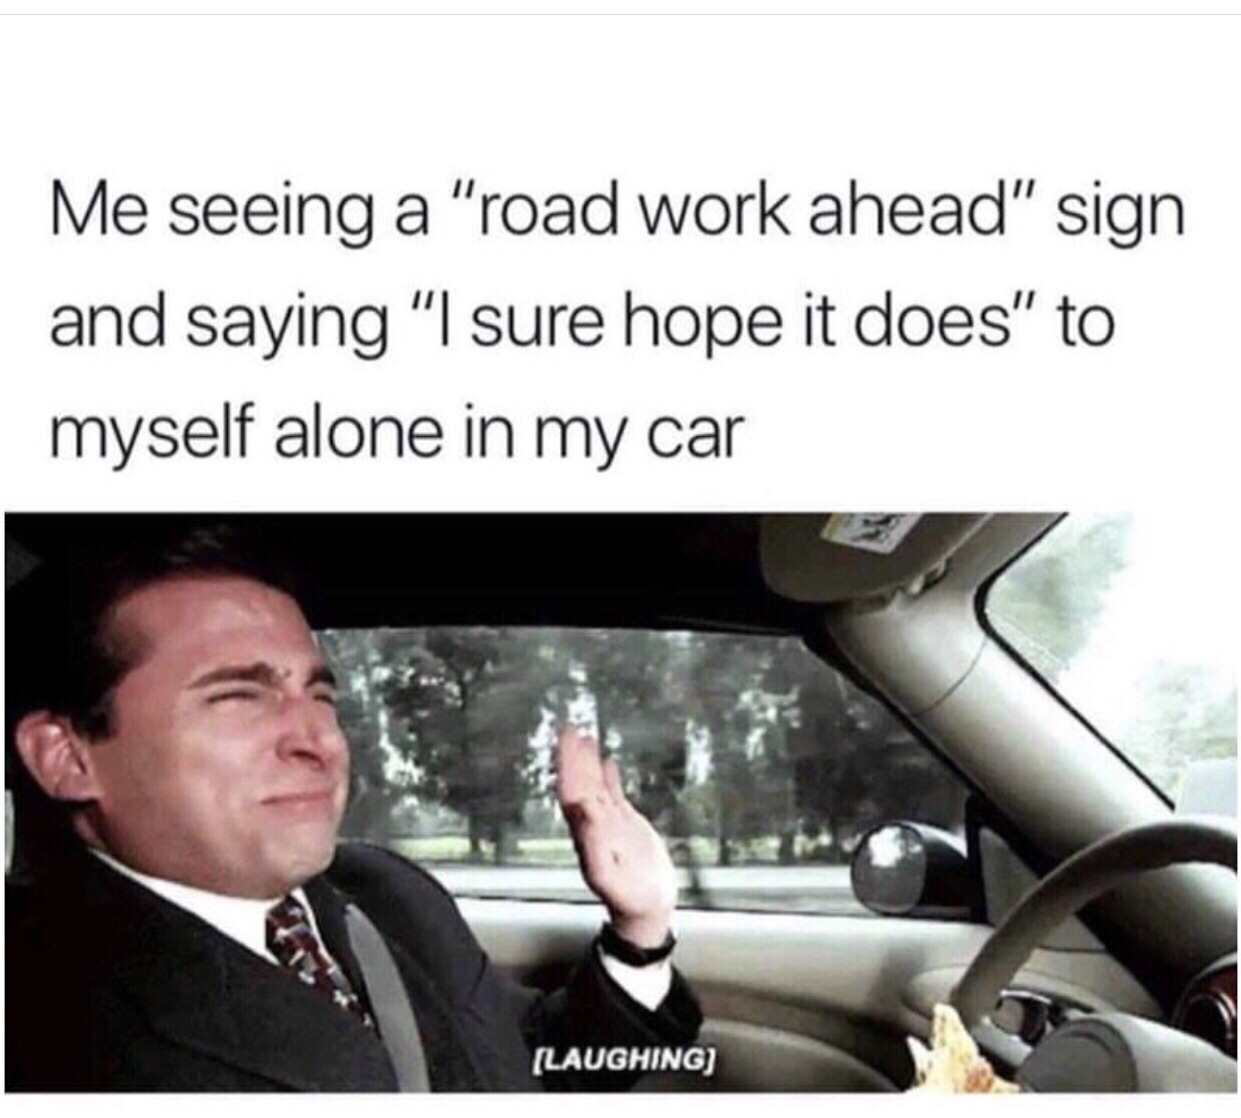 Meme - Me seeing a "road work ahead" sign and saying "I sure hope it does" to myself alone in my car Laughing